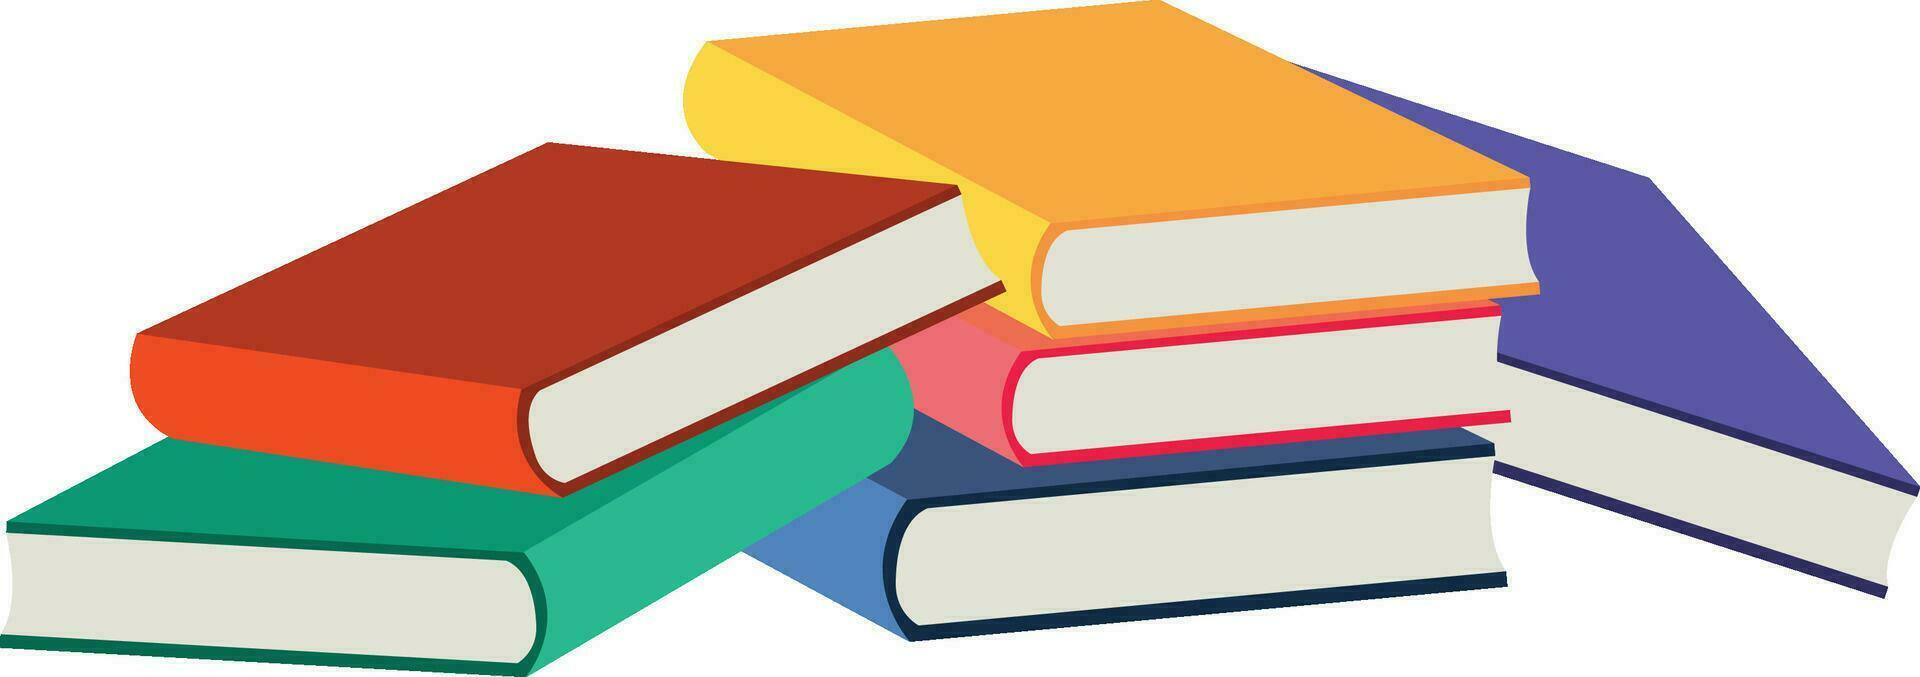 books stack on white background vector